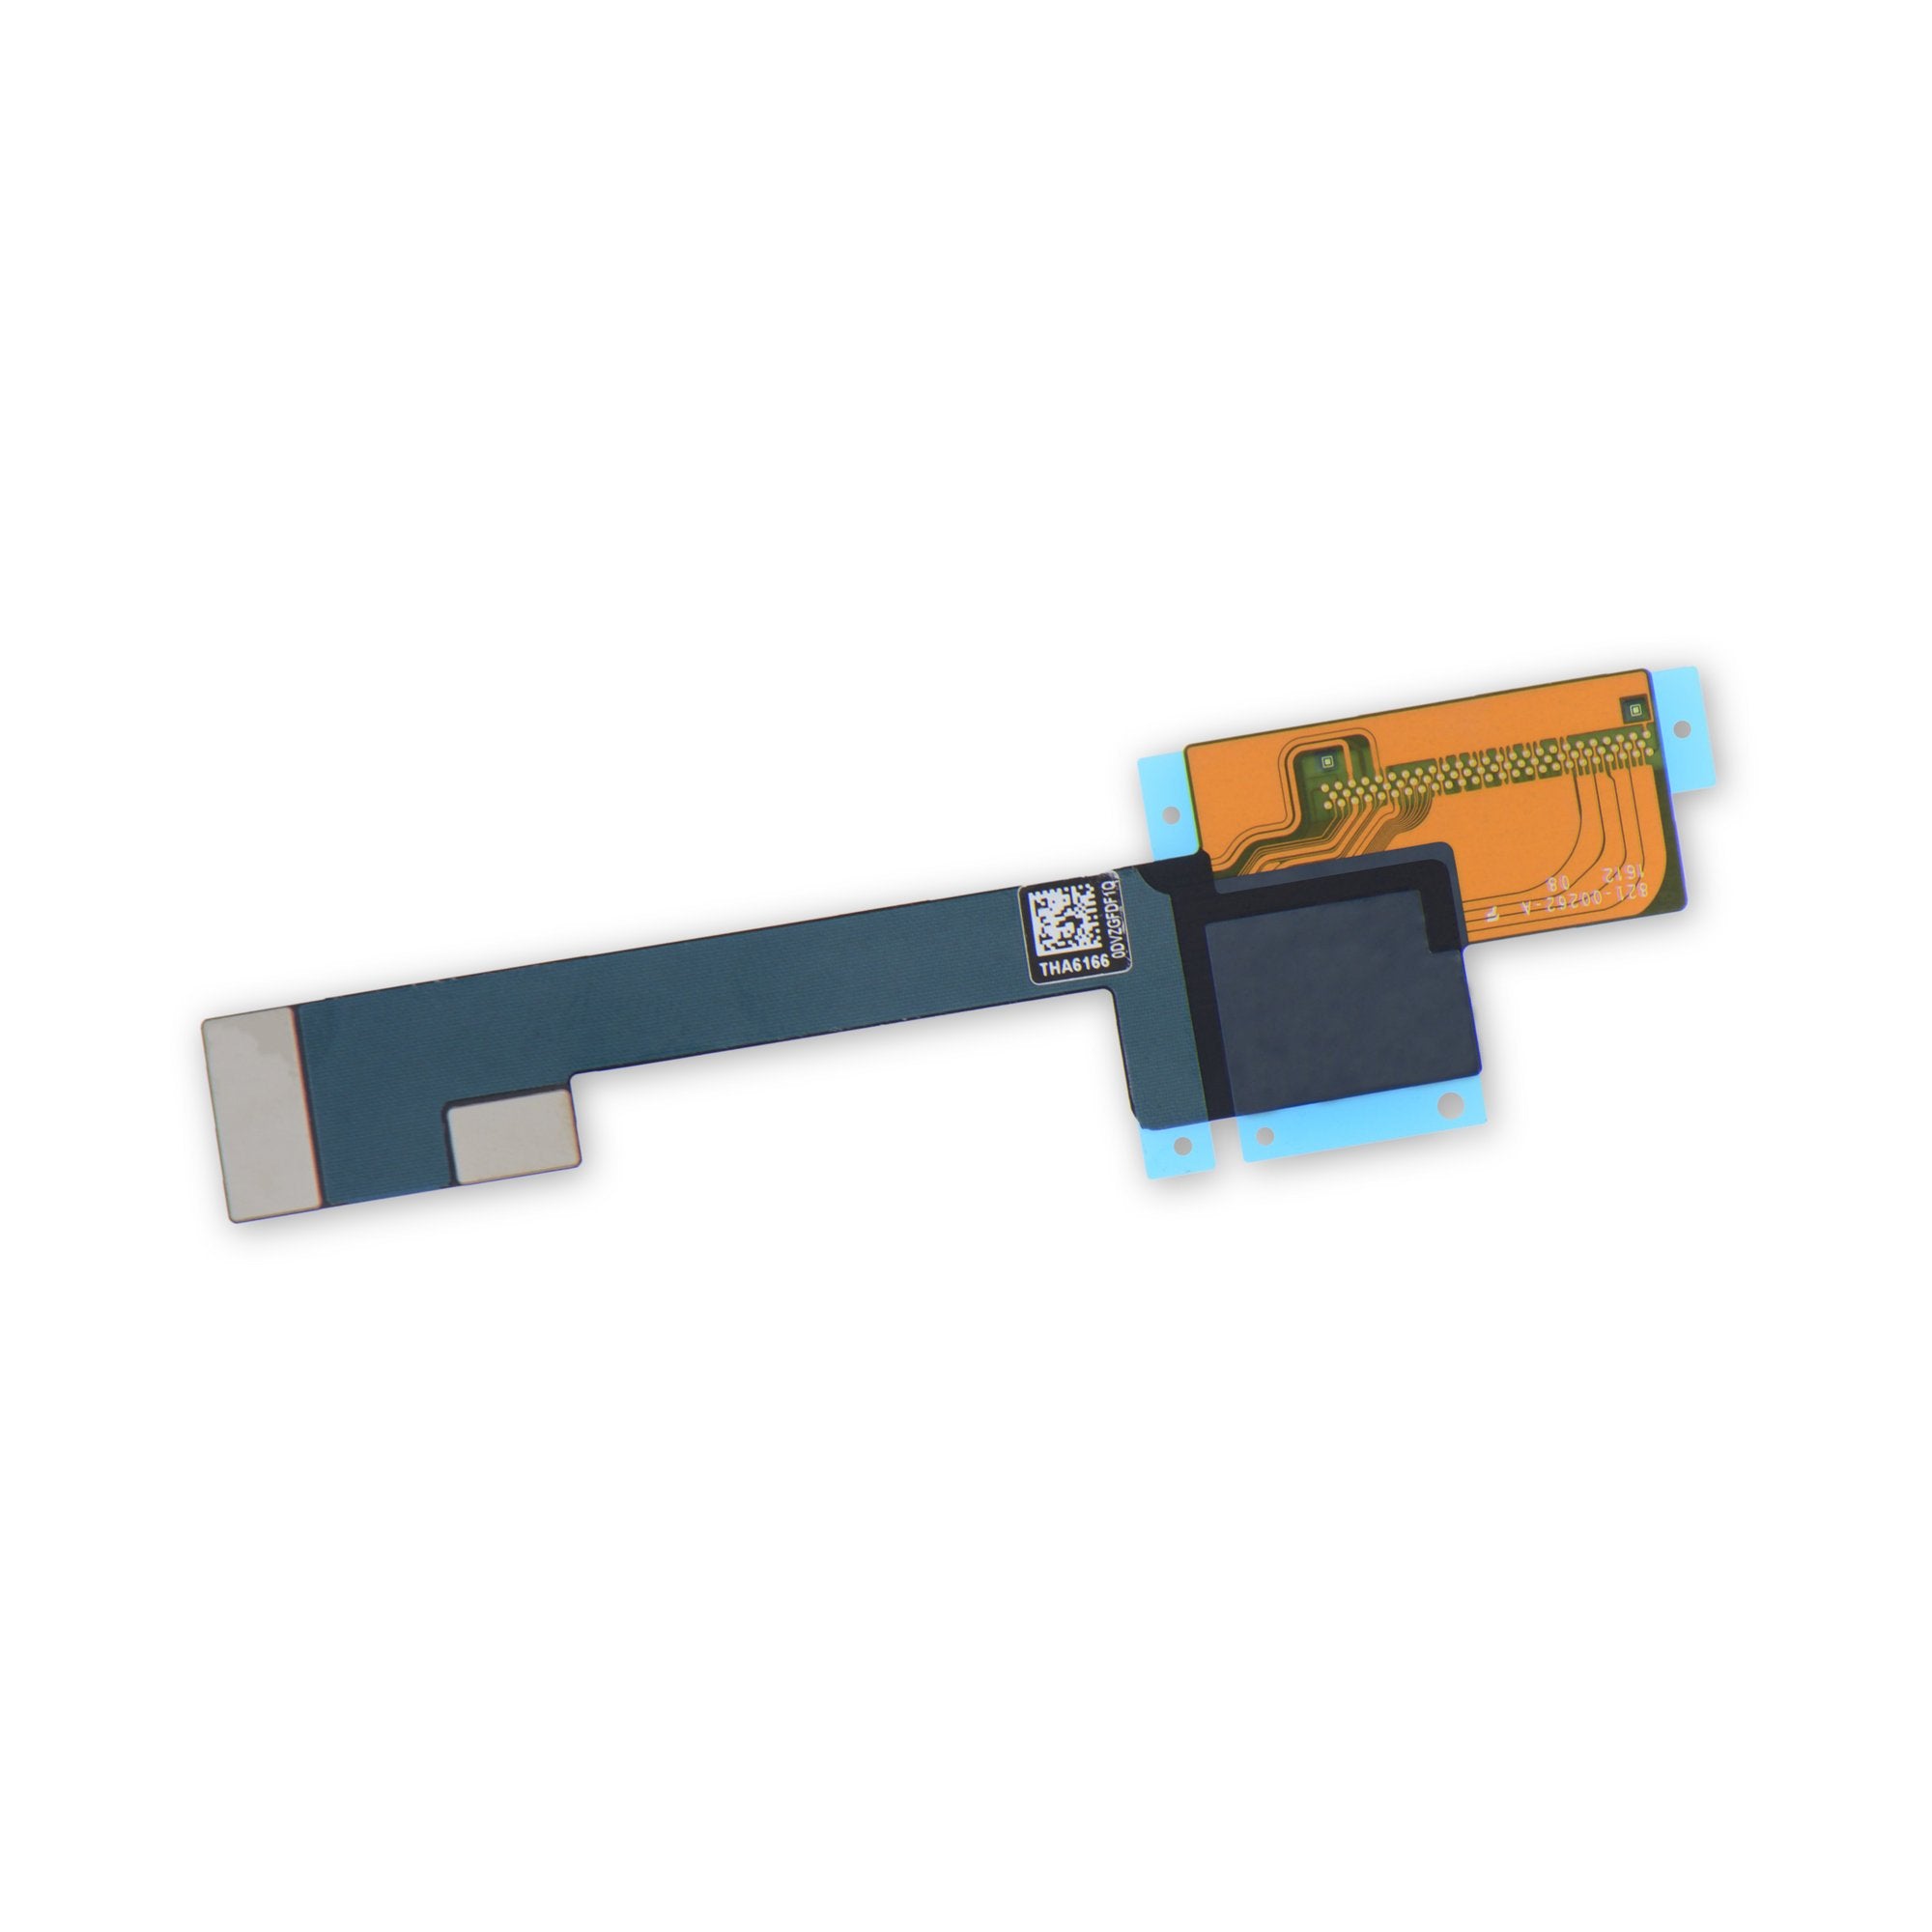 iPad Pro 9.7" (Cellular) Logic Board Connector Cable